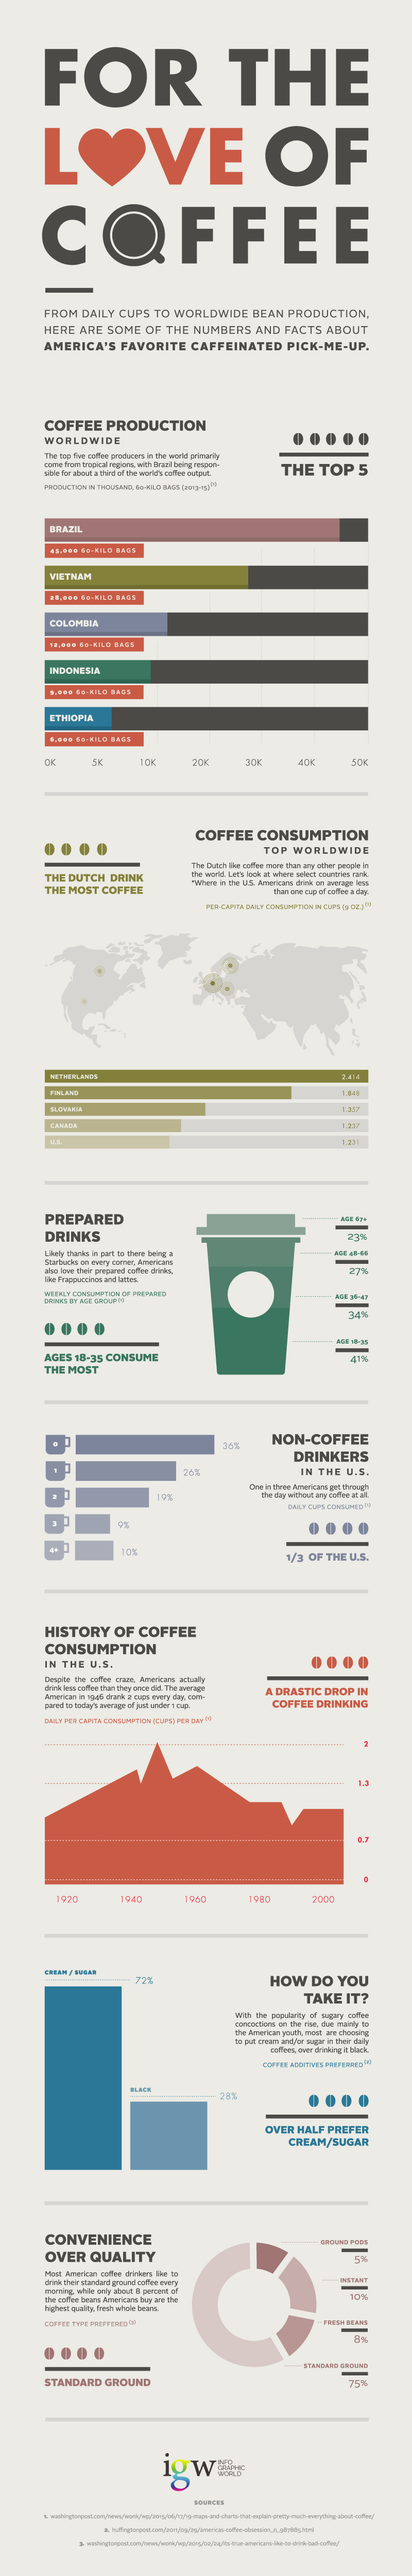 Coffee Facts and Numbers